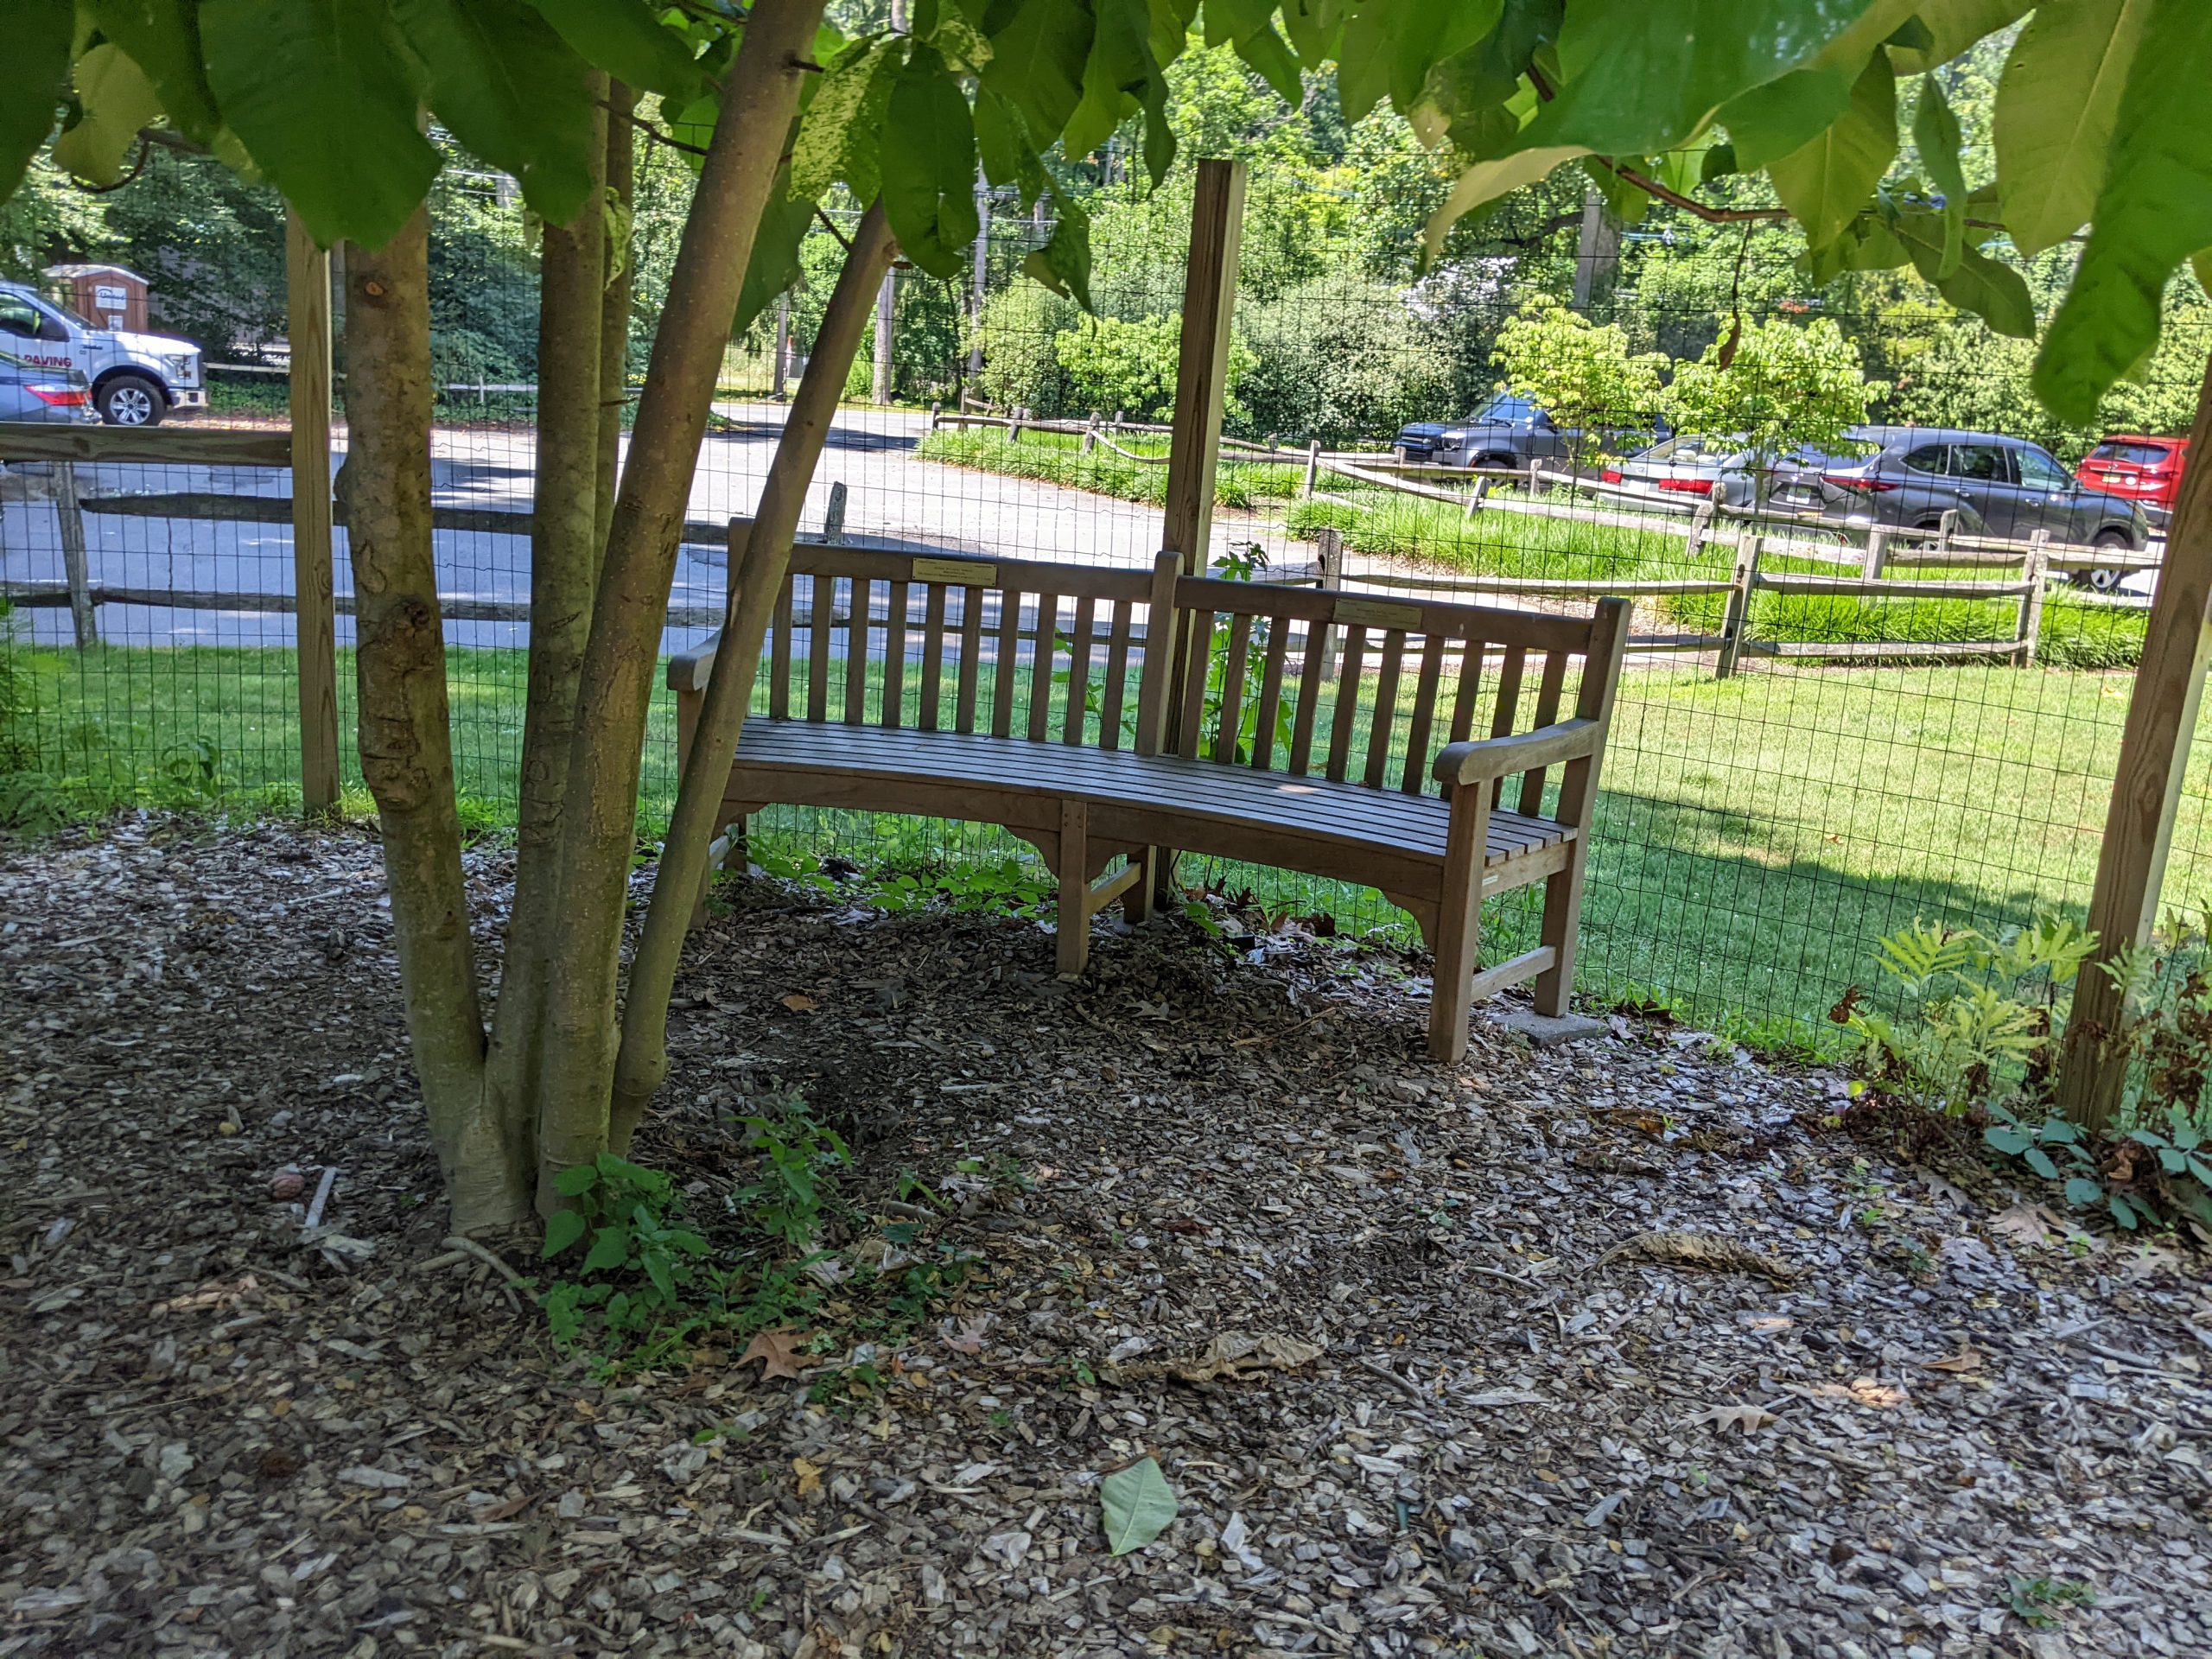 SHADY - Bench near gate at Marquand Park in Princeton NJ